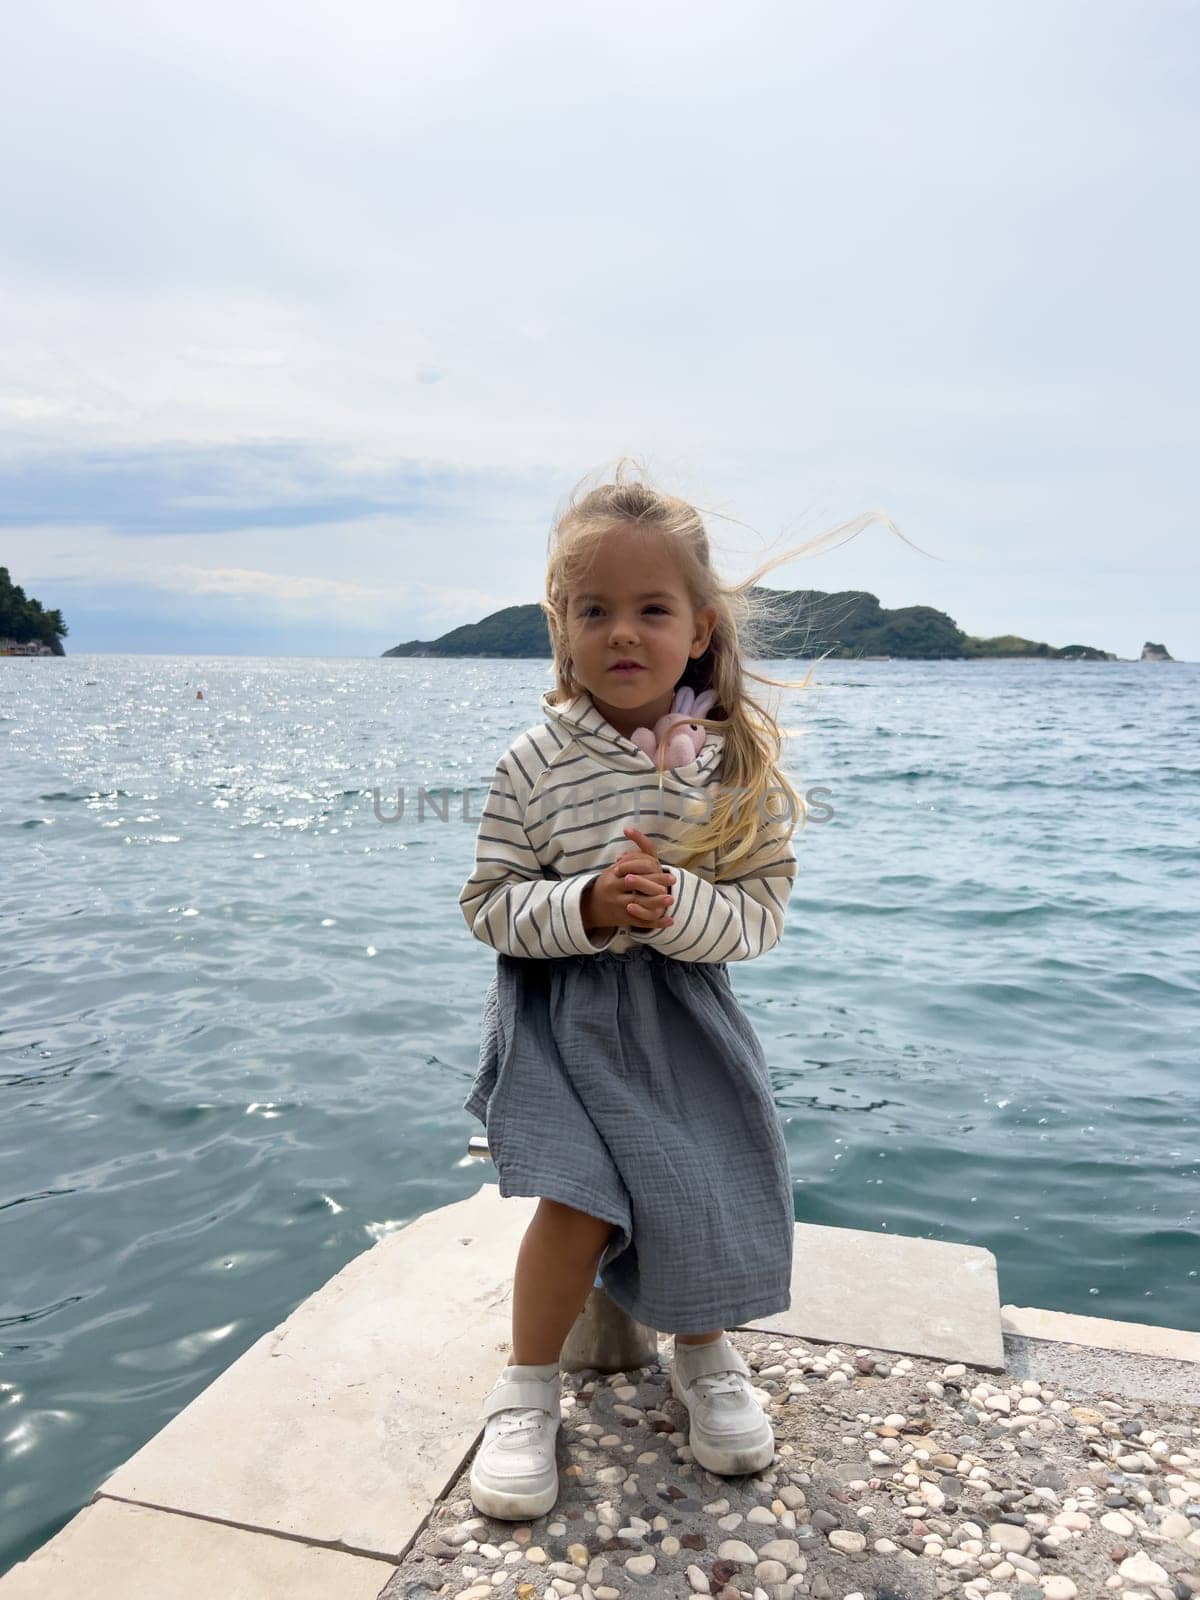 Little girl with flying hair sits on a bollard on a pier by the sea by Nadtochiy